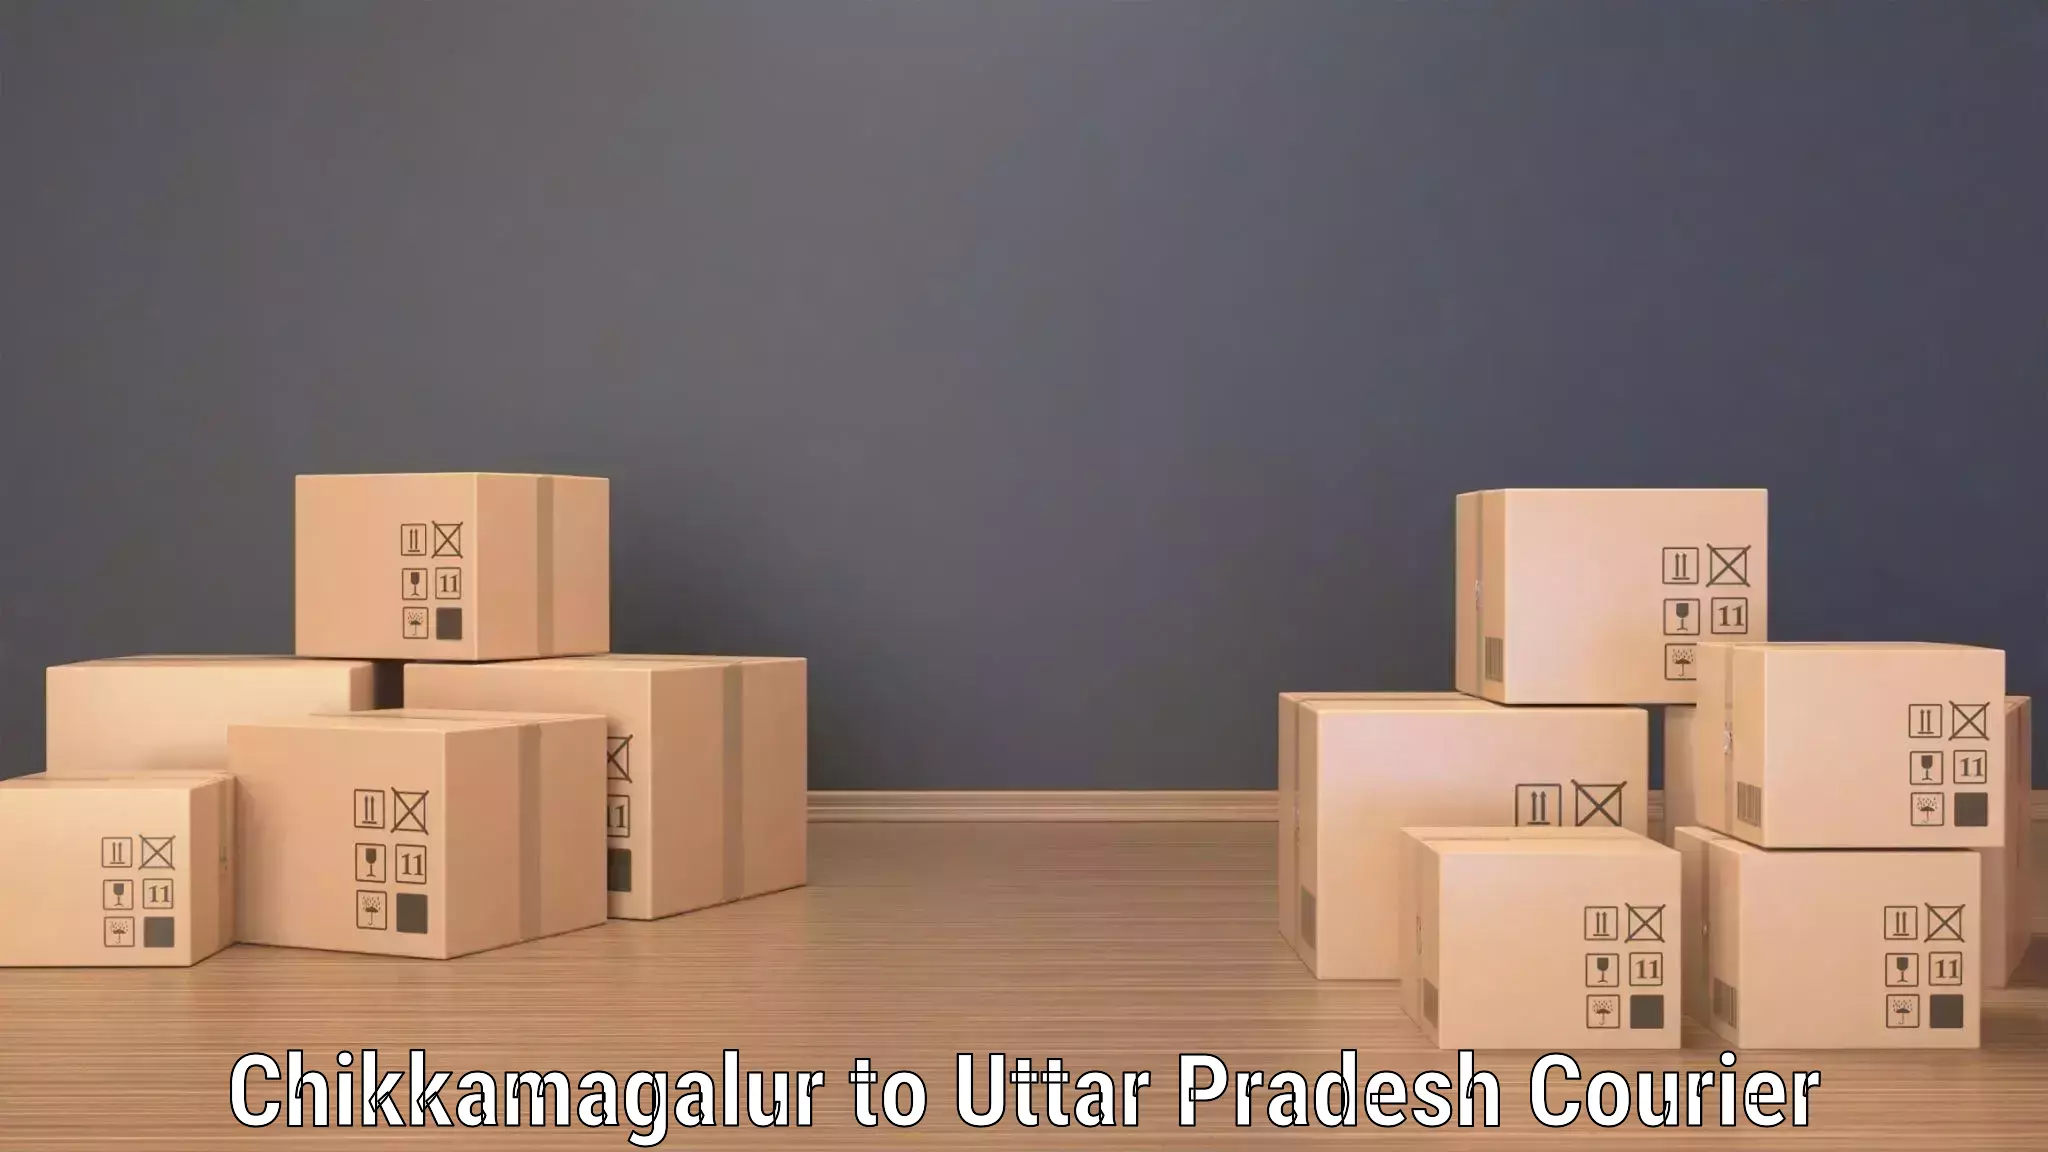 Package delivery network Chikkamagalur to Anandnagar